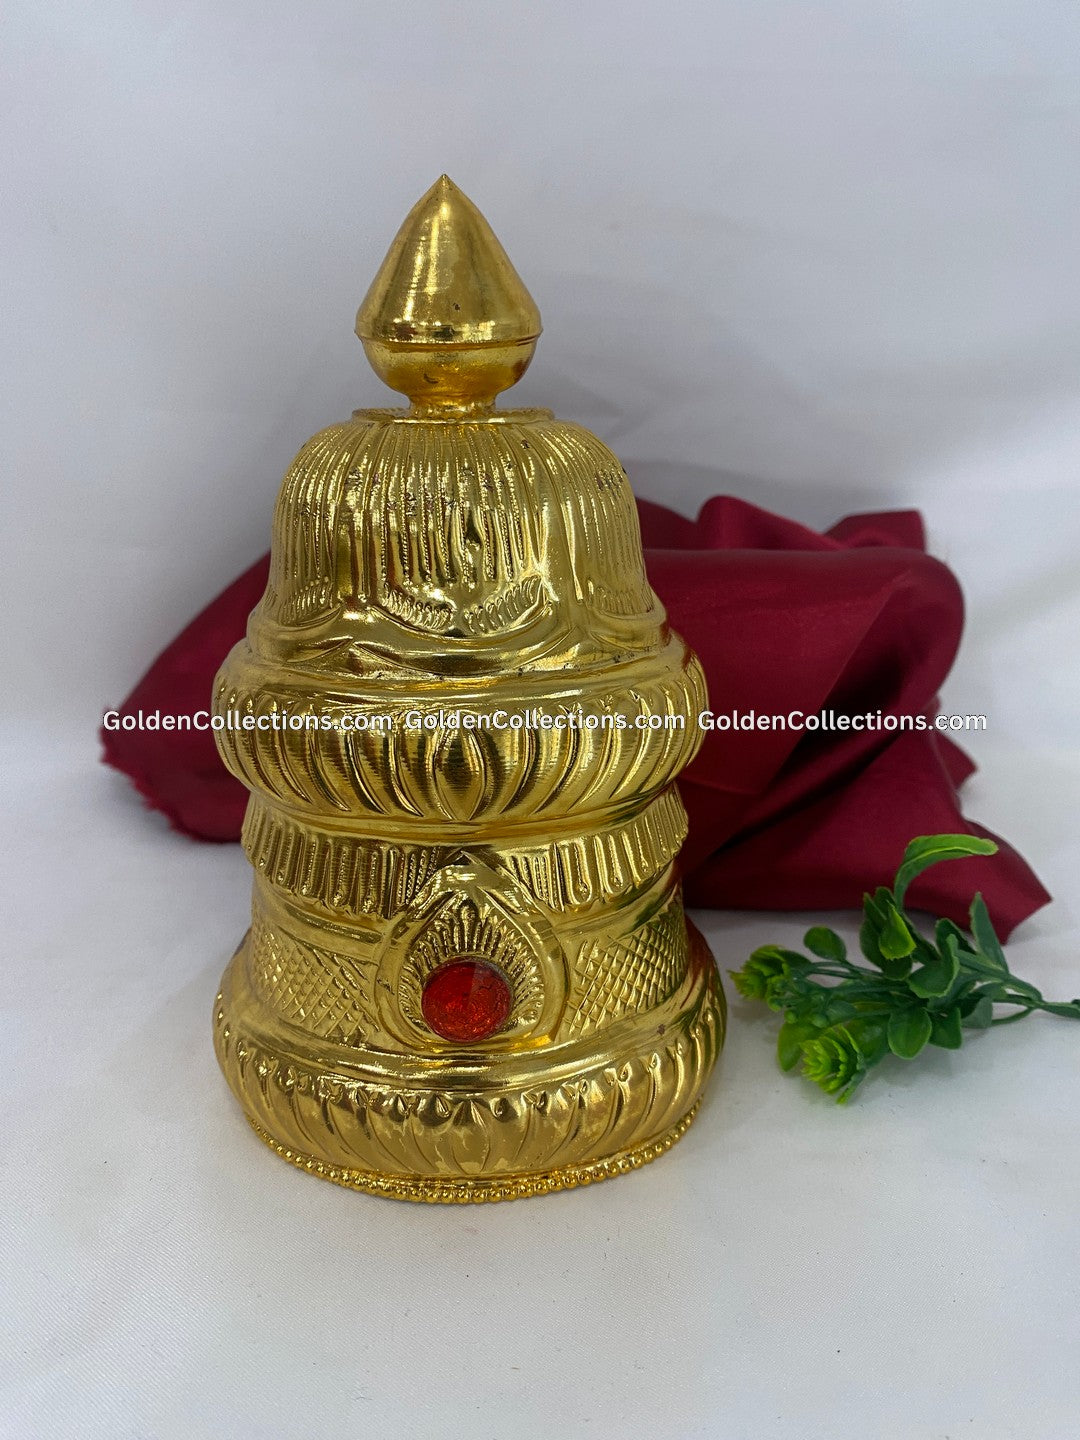 Divine Adornments for God Goddess Crown - GoldenCollections DGC-050